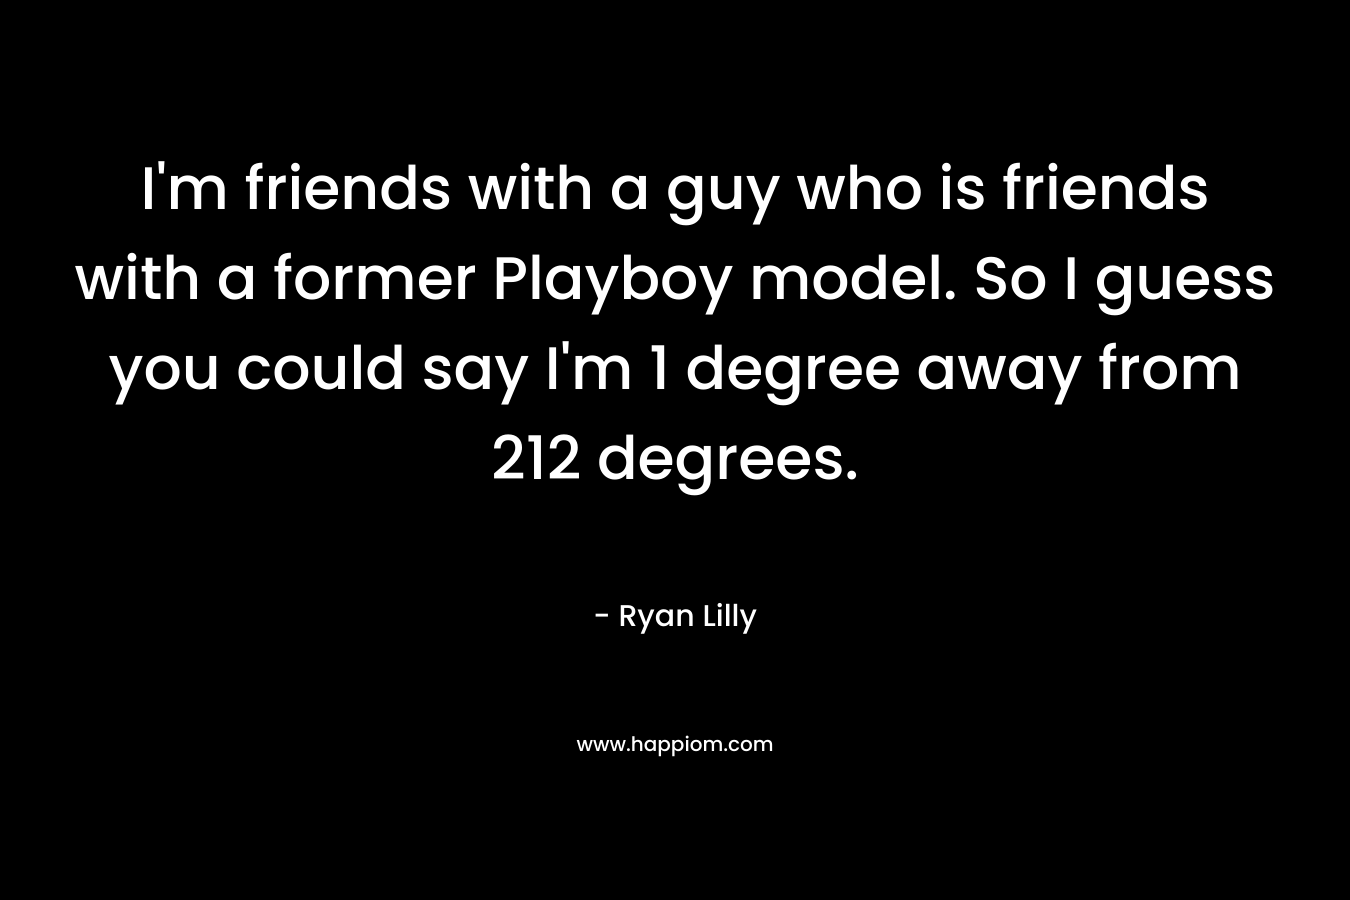 I'm friends with a guy who is friends with a former Playboy model. So I guess you could say I'm 1 degree away from 212 degrees.